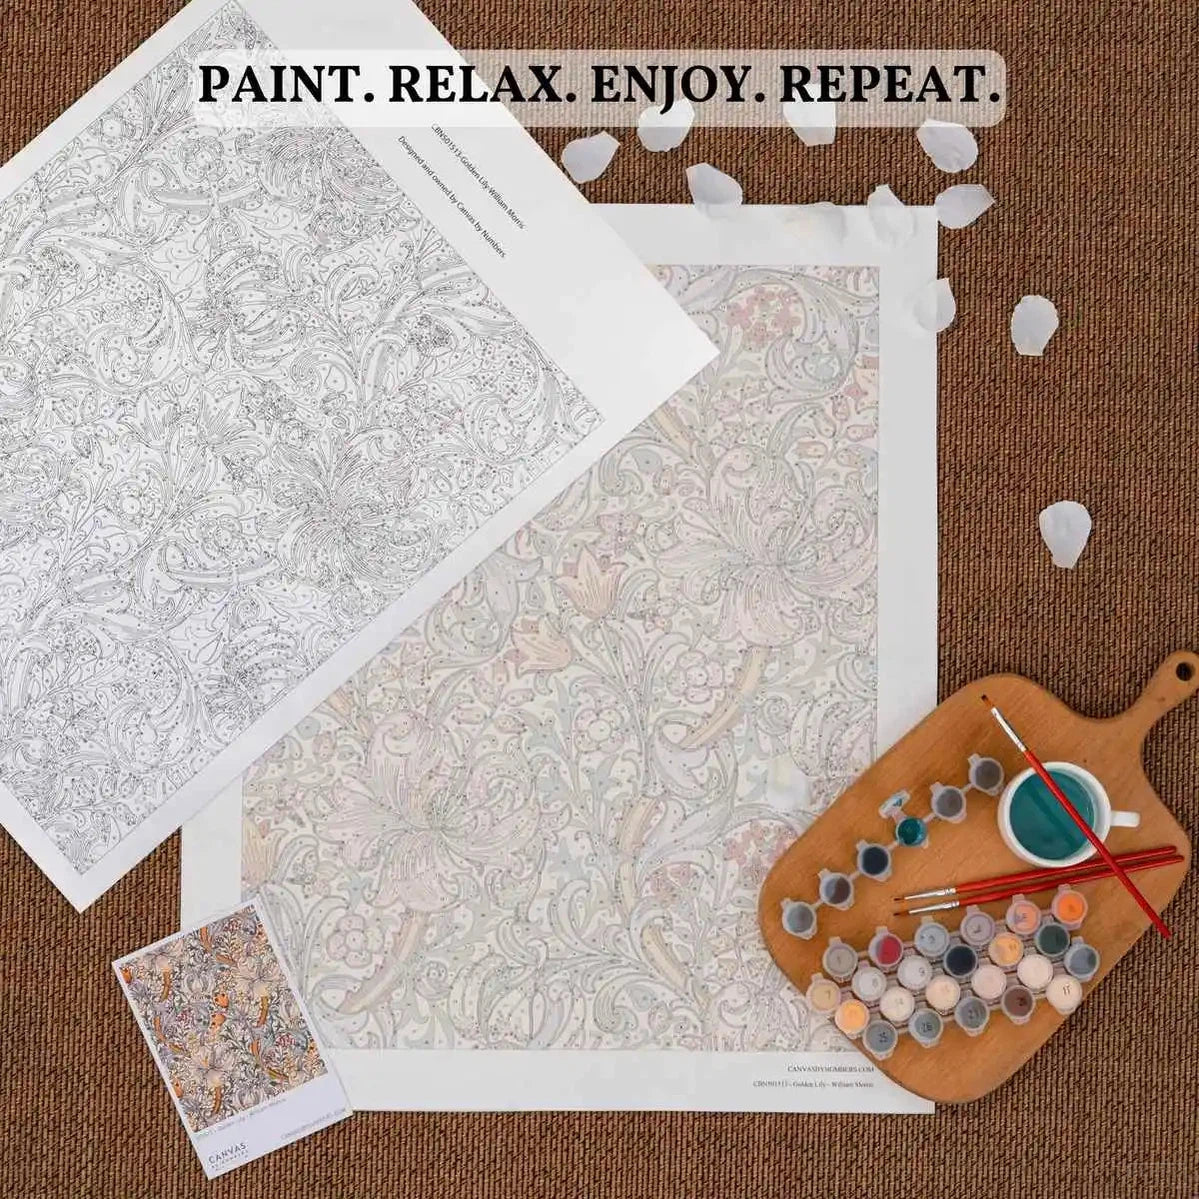 Tranquil Sailing - Paint by Numbers-Take a load off with this Tranquil Sailing paint by numbers set. With a peaceful lake scene, it's the perfect way to relax and unwind. Only at CBN!-Canvas by Numbers